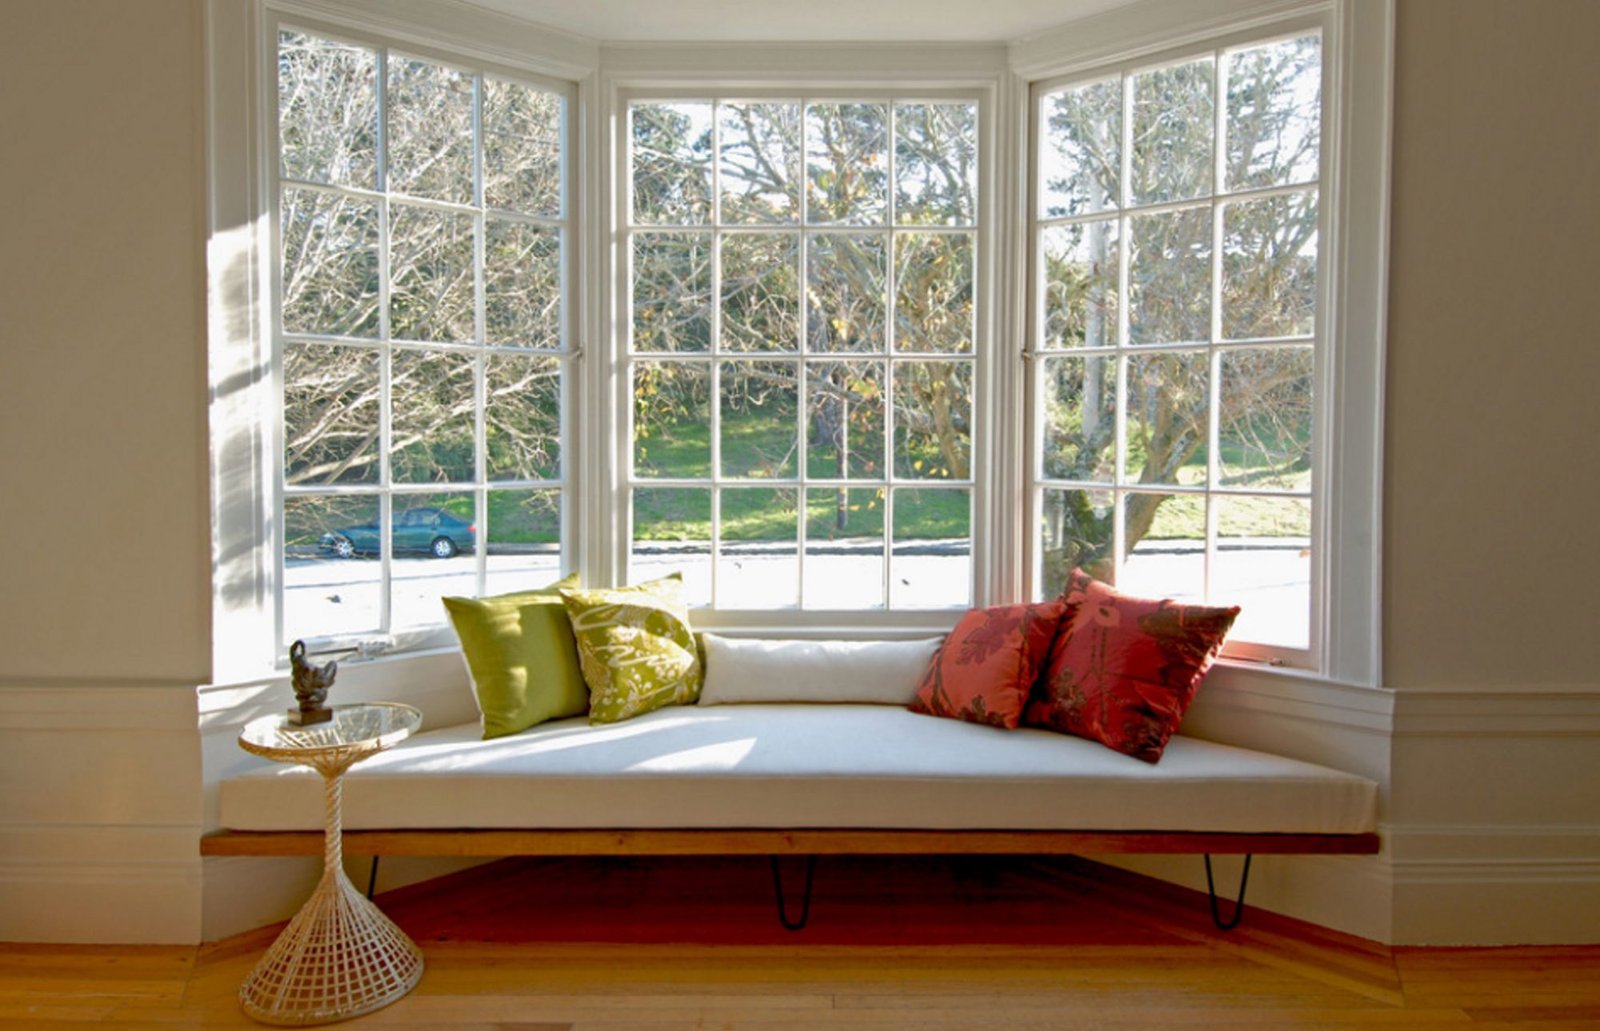 How to Build Seating for a Bay Window